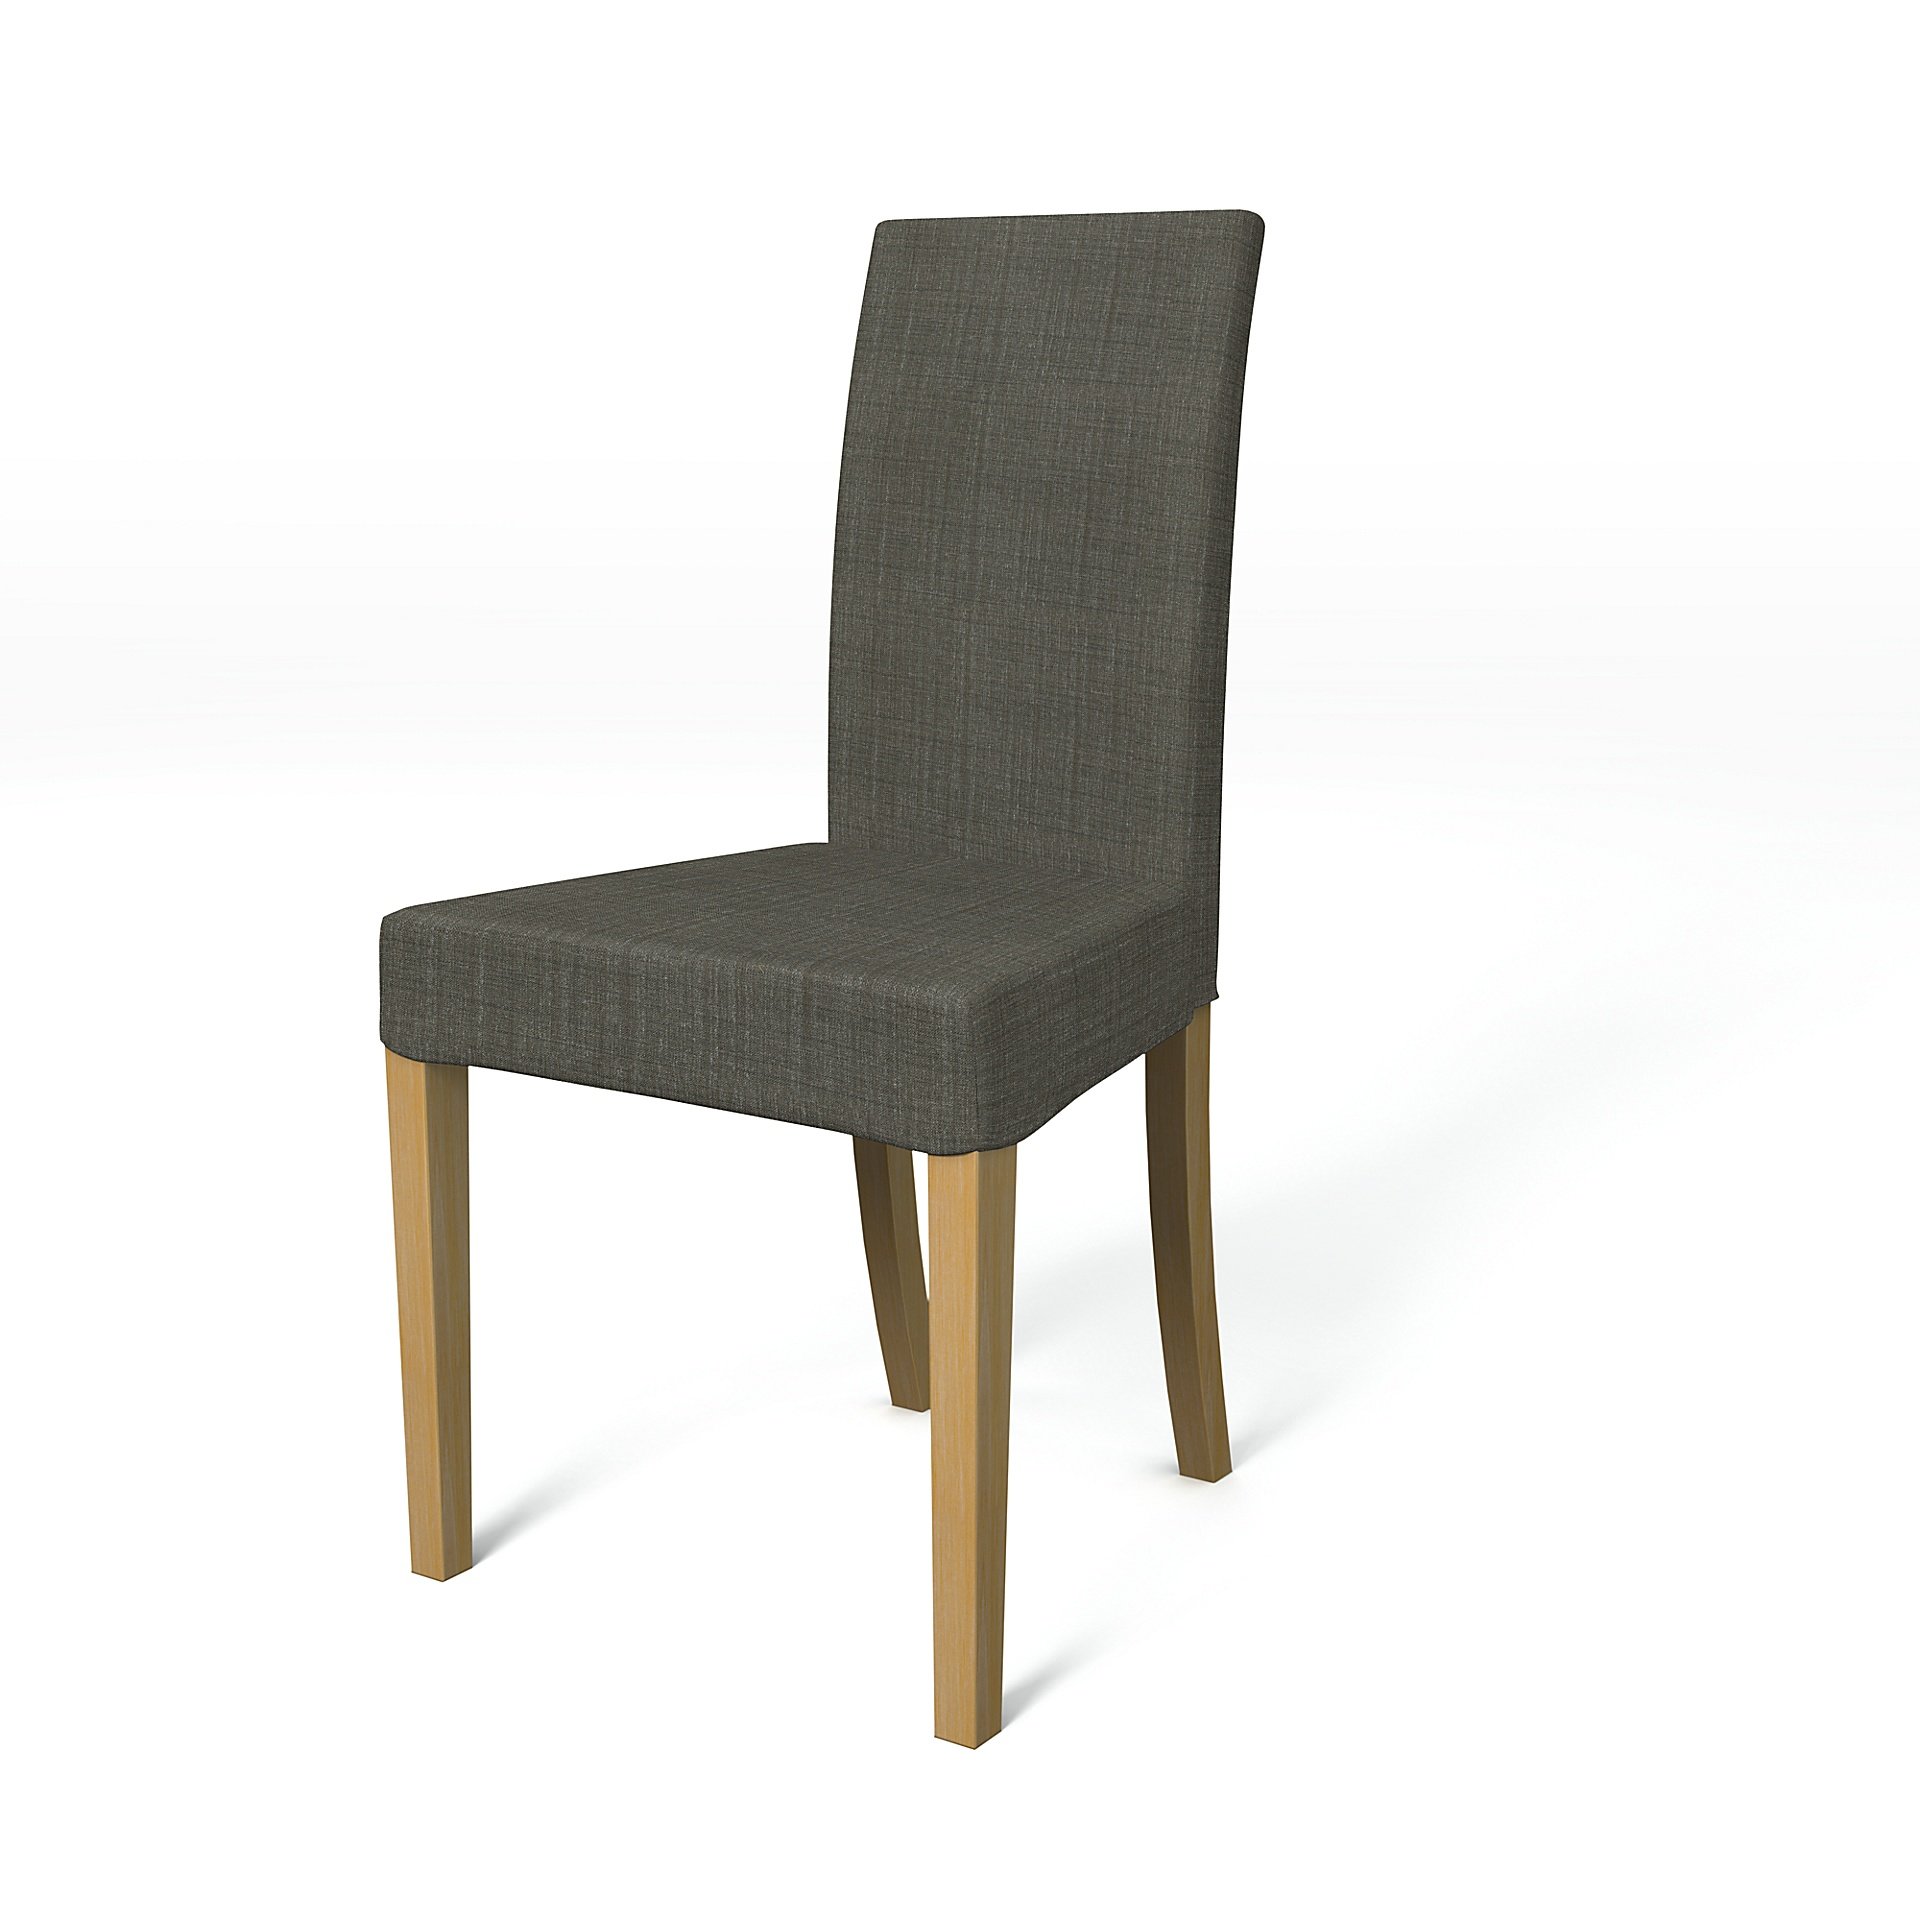 IKEA - Harry Dining Chair Cover, Mole Brown, Boucle & Texture - Bemz